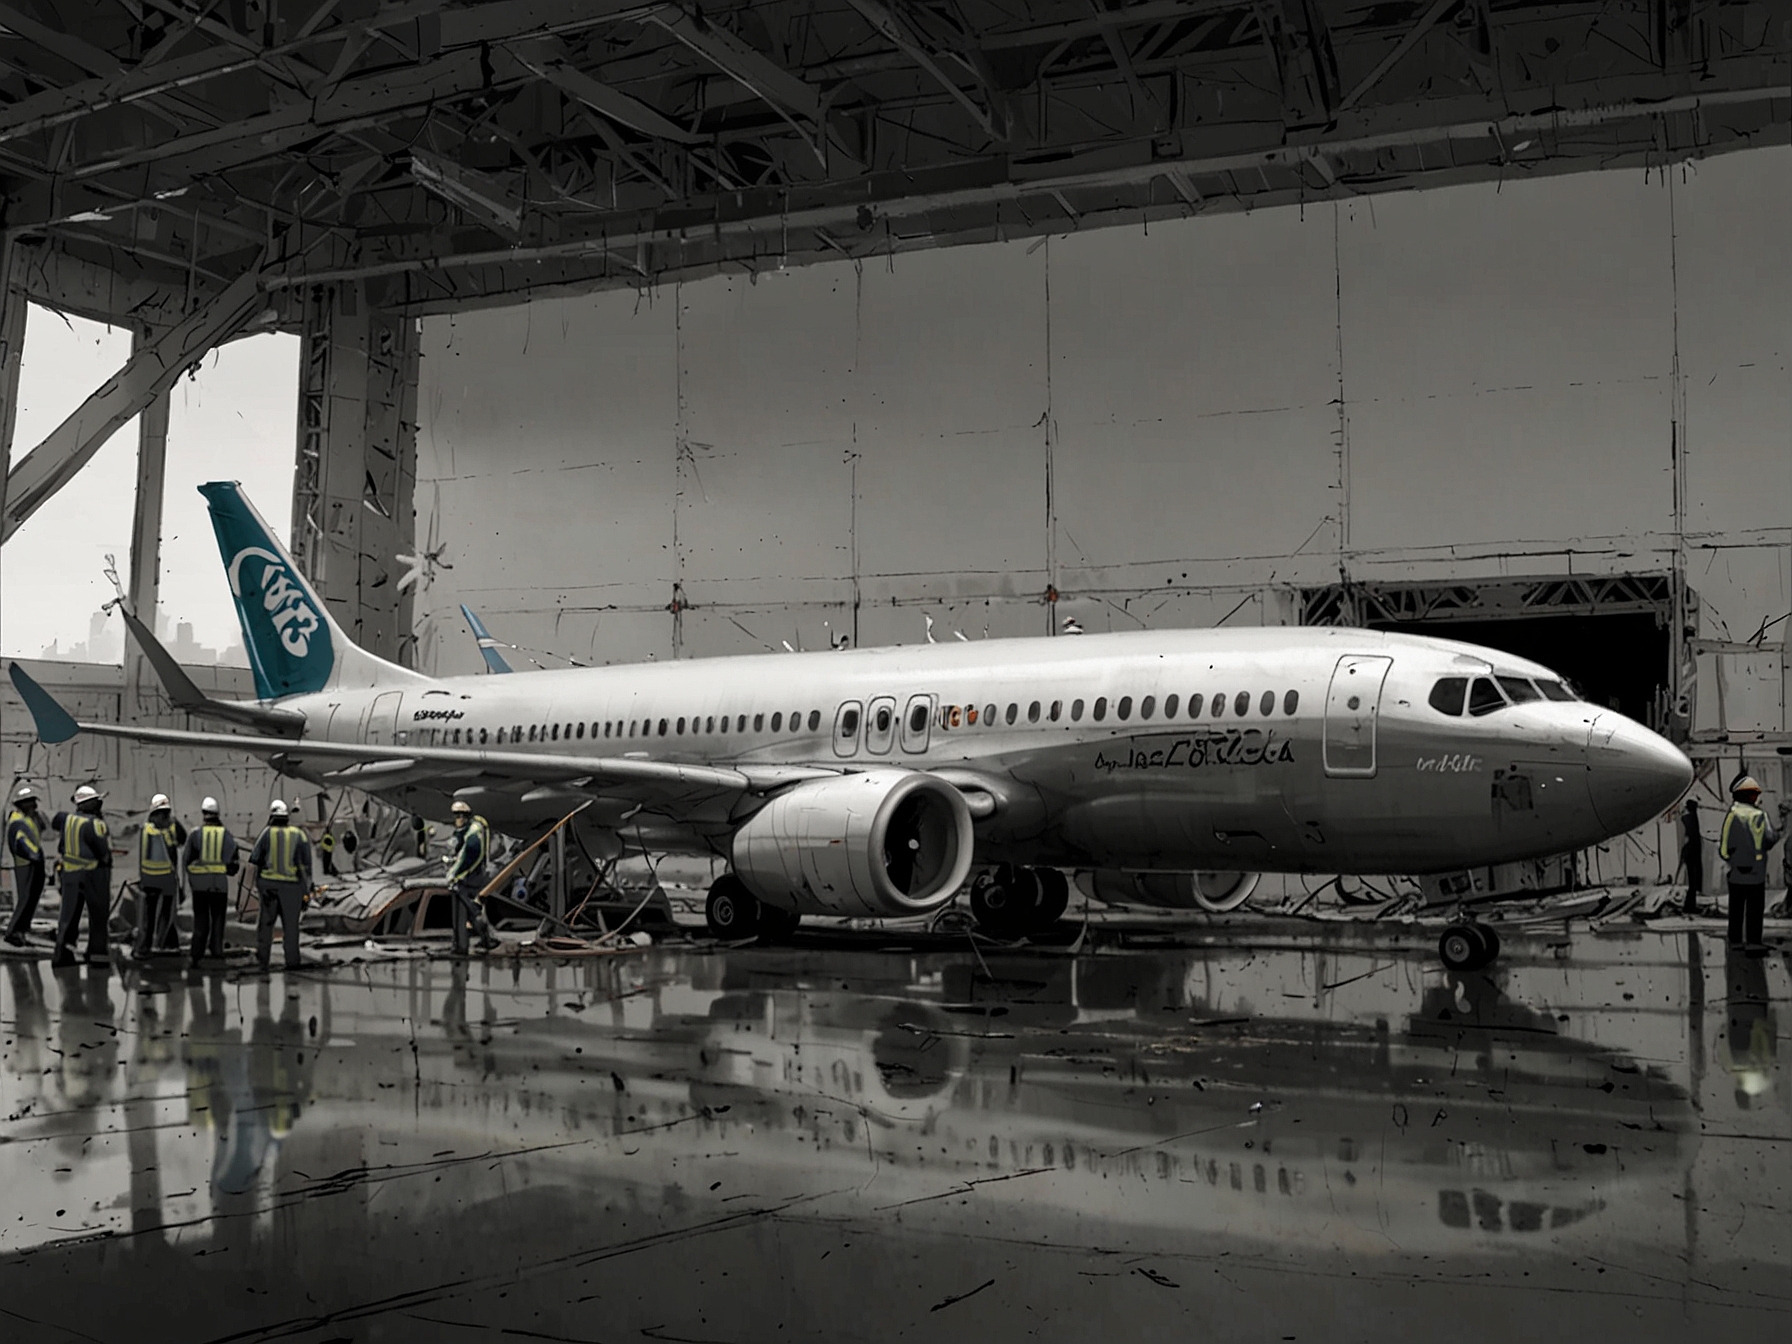 An image of a Boeing 737 Max aircraft grounded, with maintenance crews working on it, symbolizing the aftermath and ongoing scrutiny Boeing faces following the crashes.